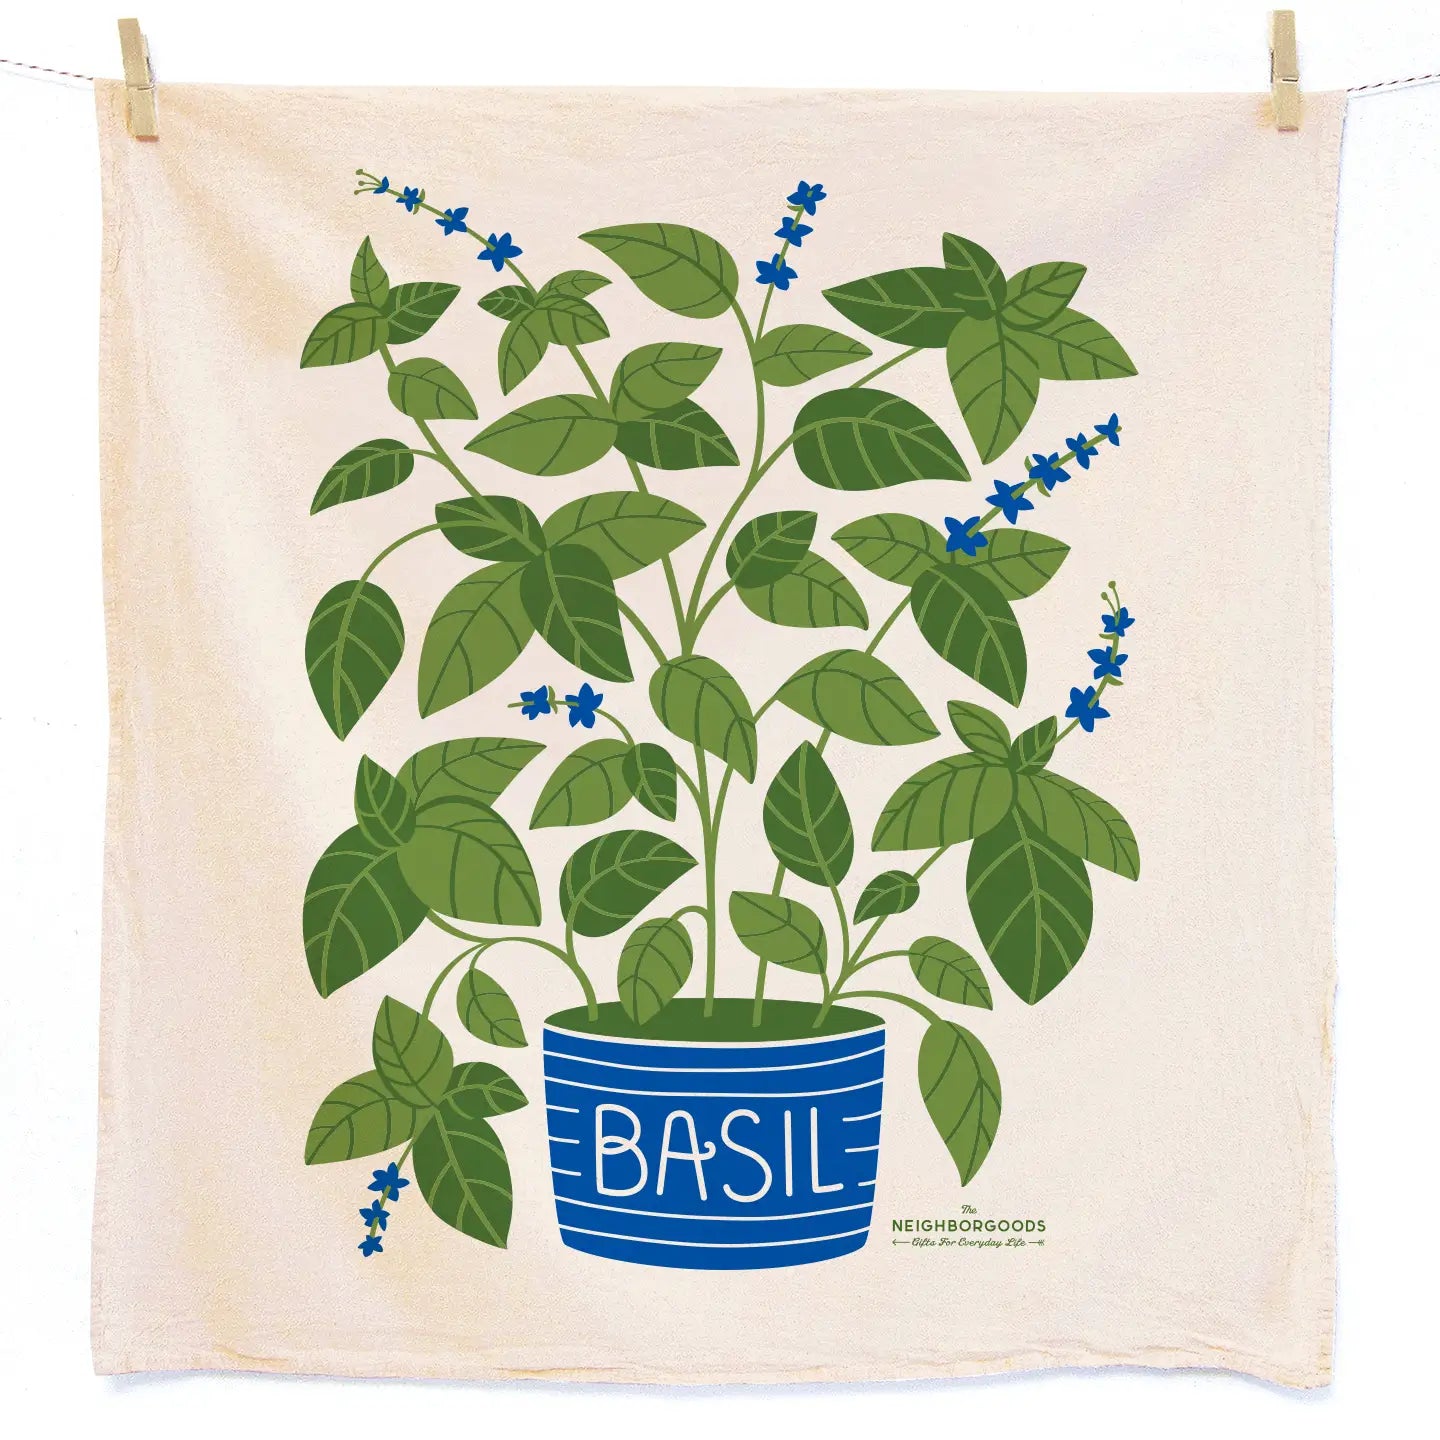 All The Neighborgoods dish towels add a bright pop of color to your kitchen. Made from 100% flour sack cotton, our Basil dish towel will only get softer and more absorbent over the years in your kitchen. This generously sized dish towel can handle small and big tasks in the kitchen as well as household chores.